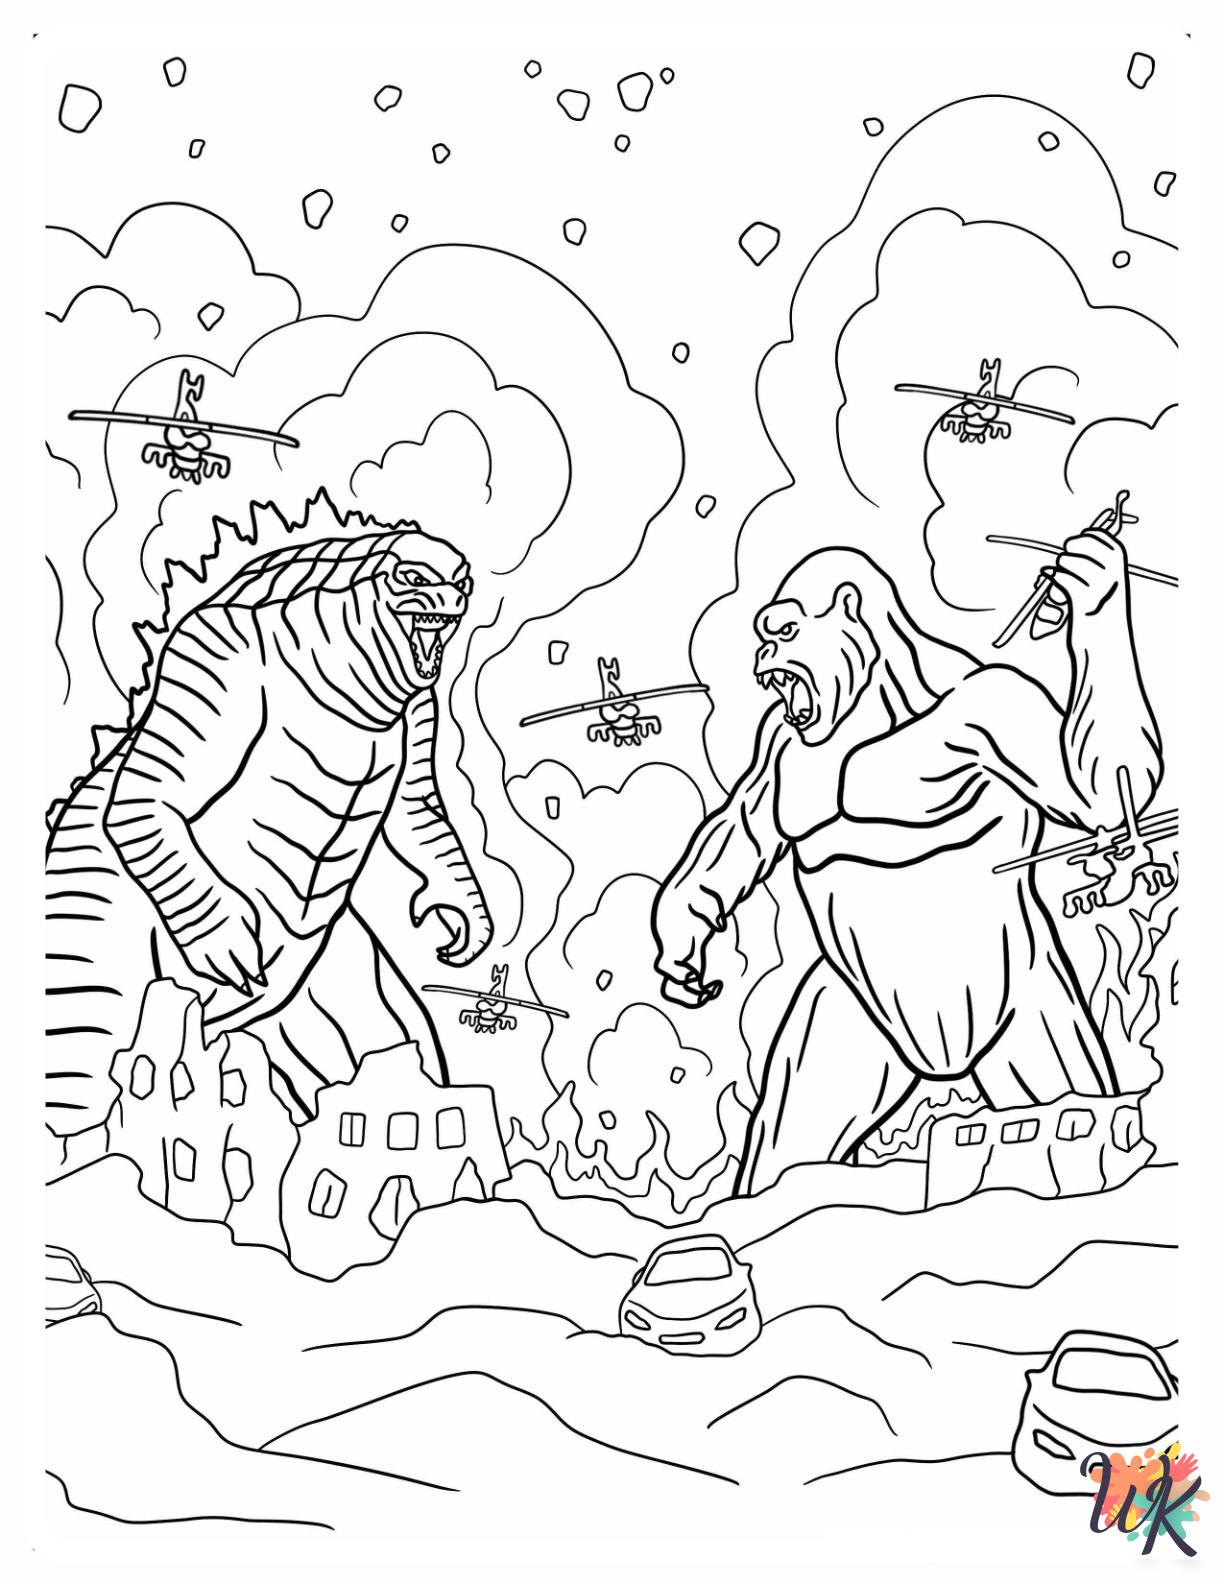 detailed Godzilla coloring pages for adults 1